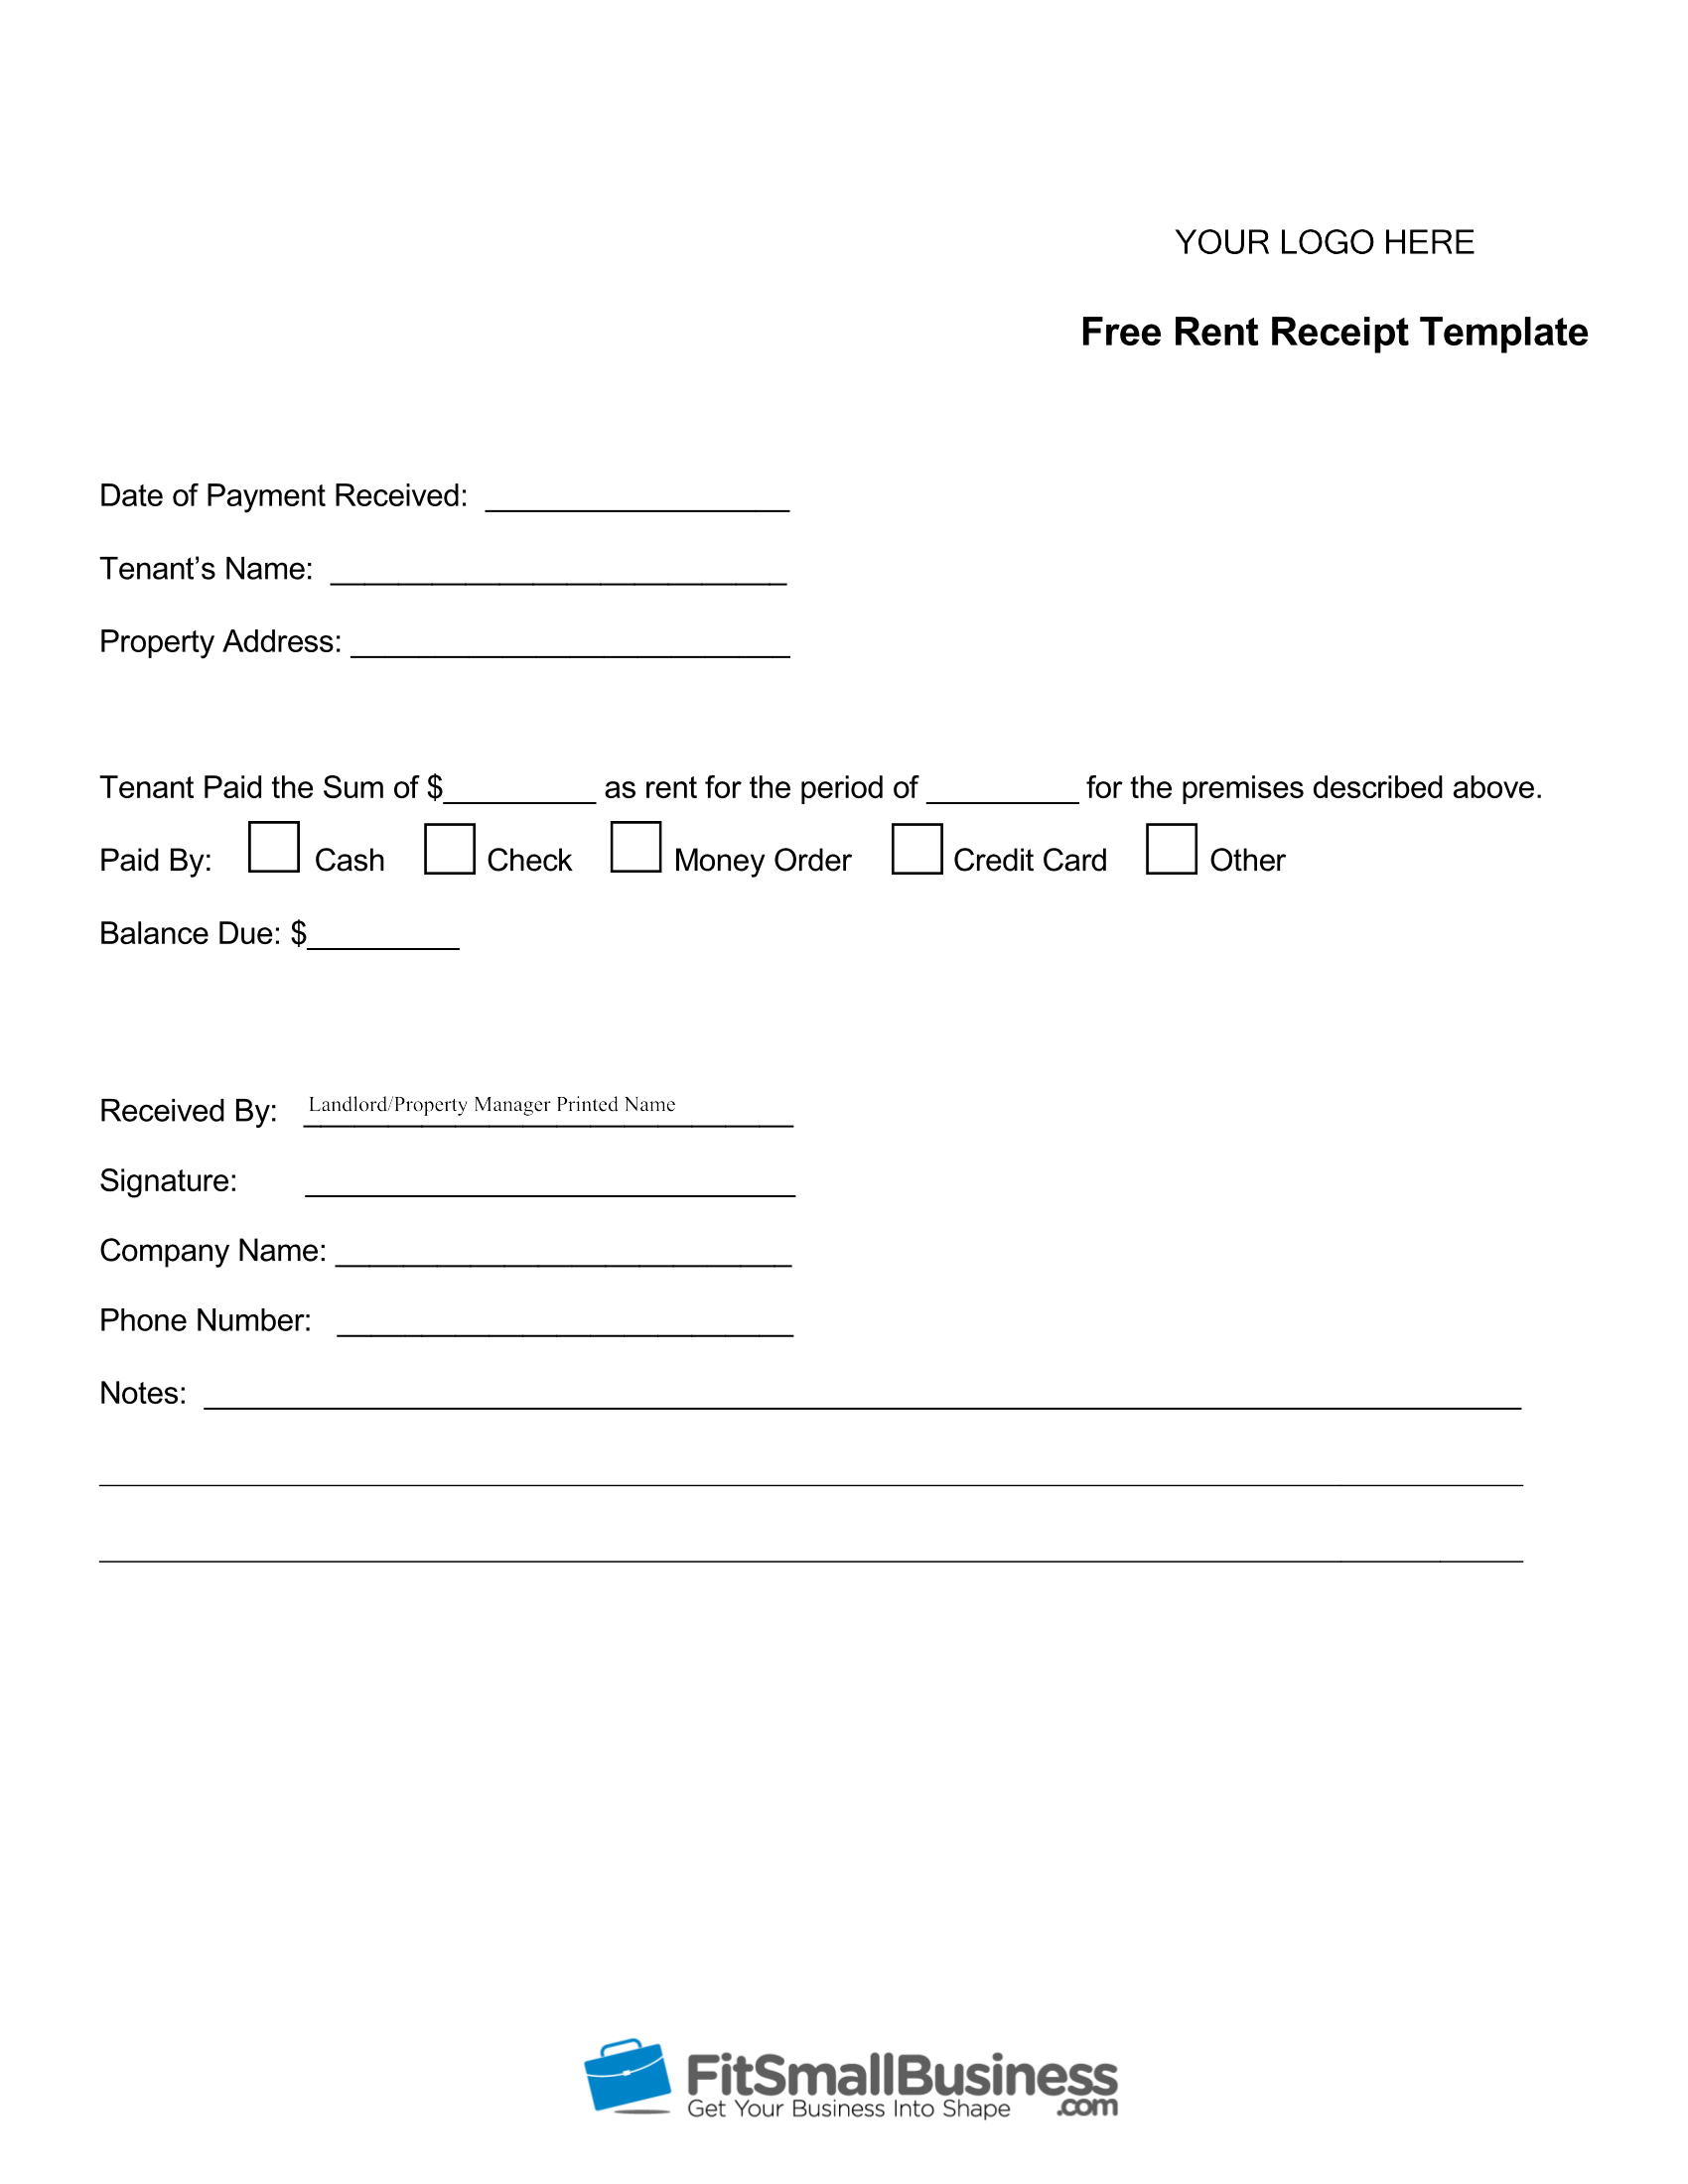 Free Printable Rent Receipt Template Download - Free Printable Rent Receipt